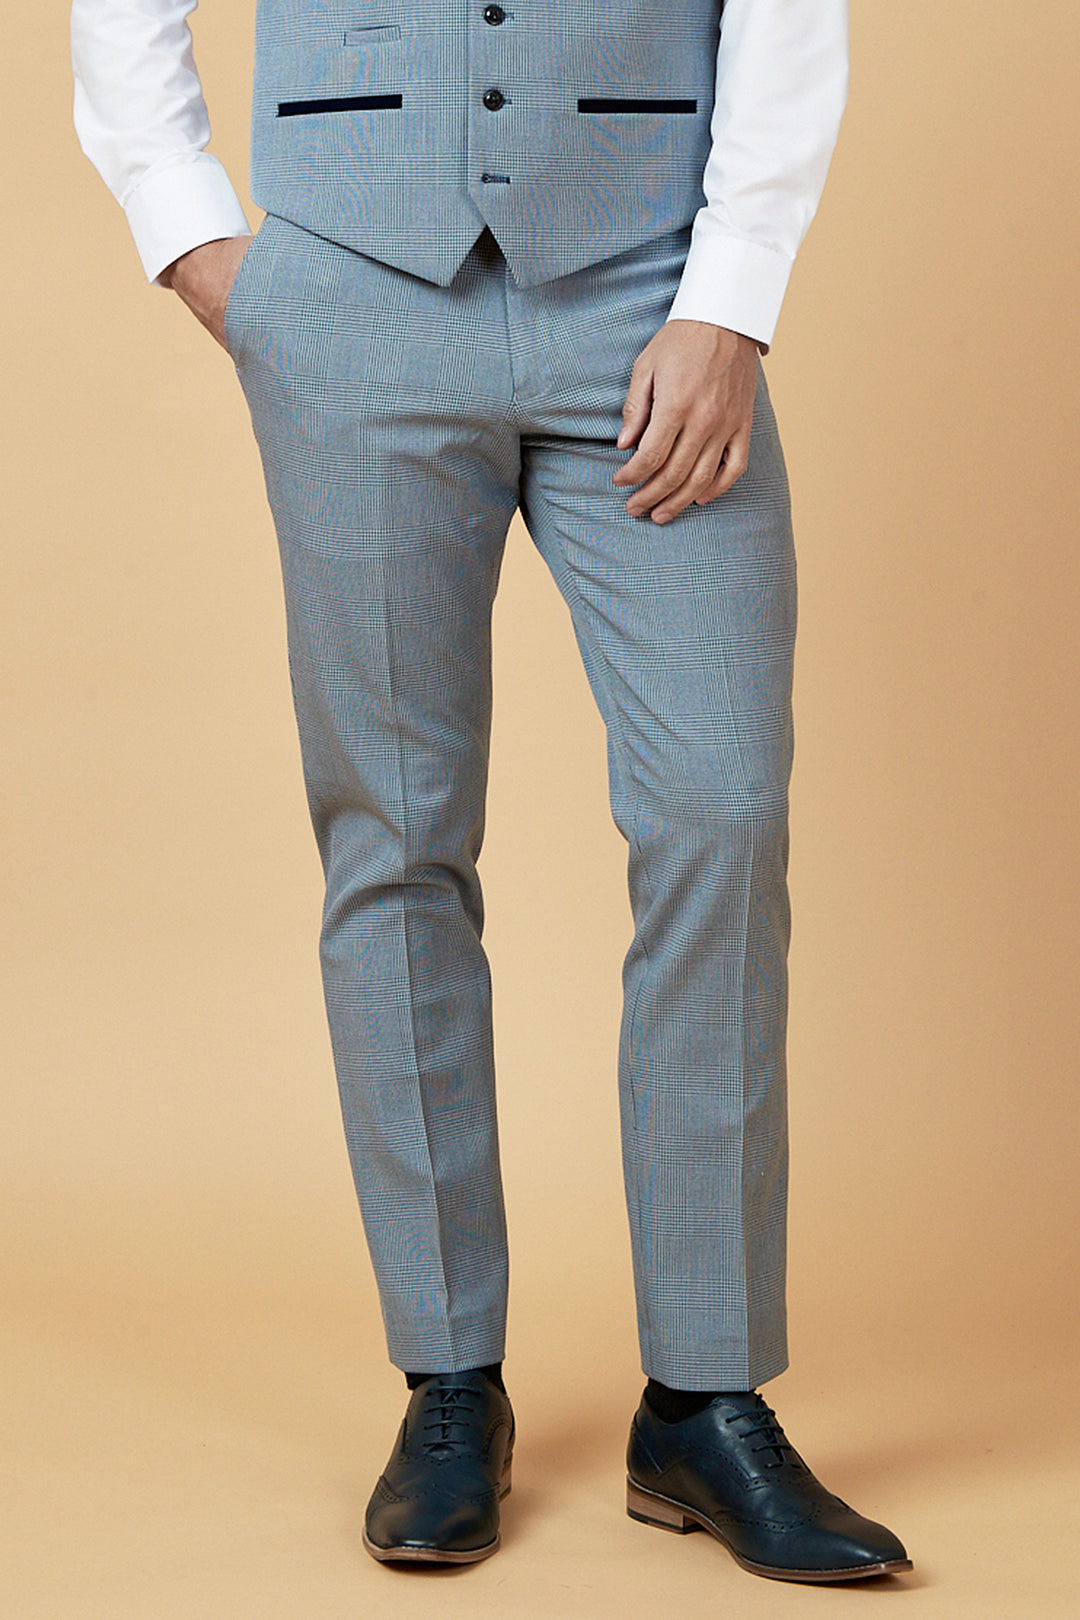 BROMLEY - Sky Blue Check Two Piece Suit